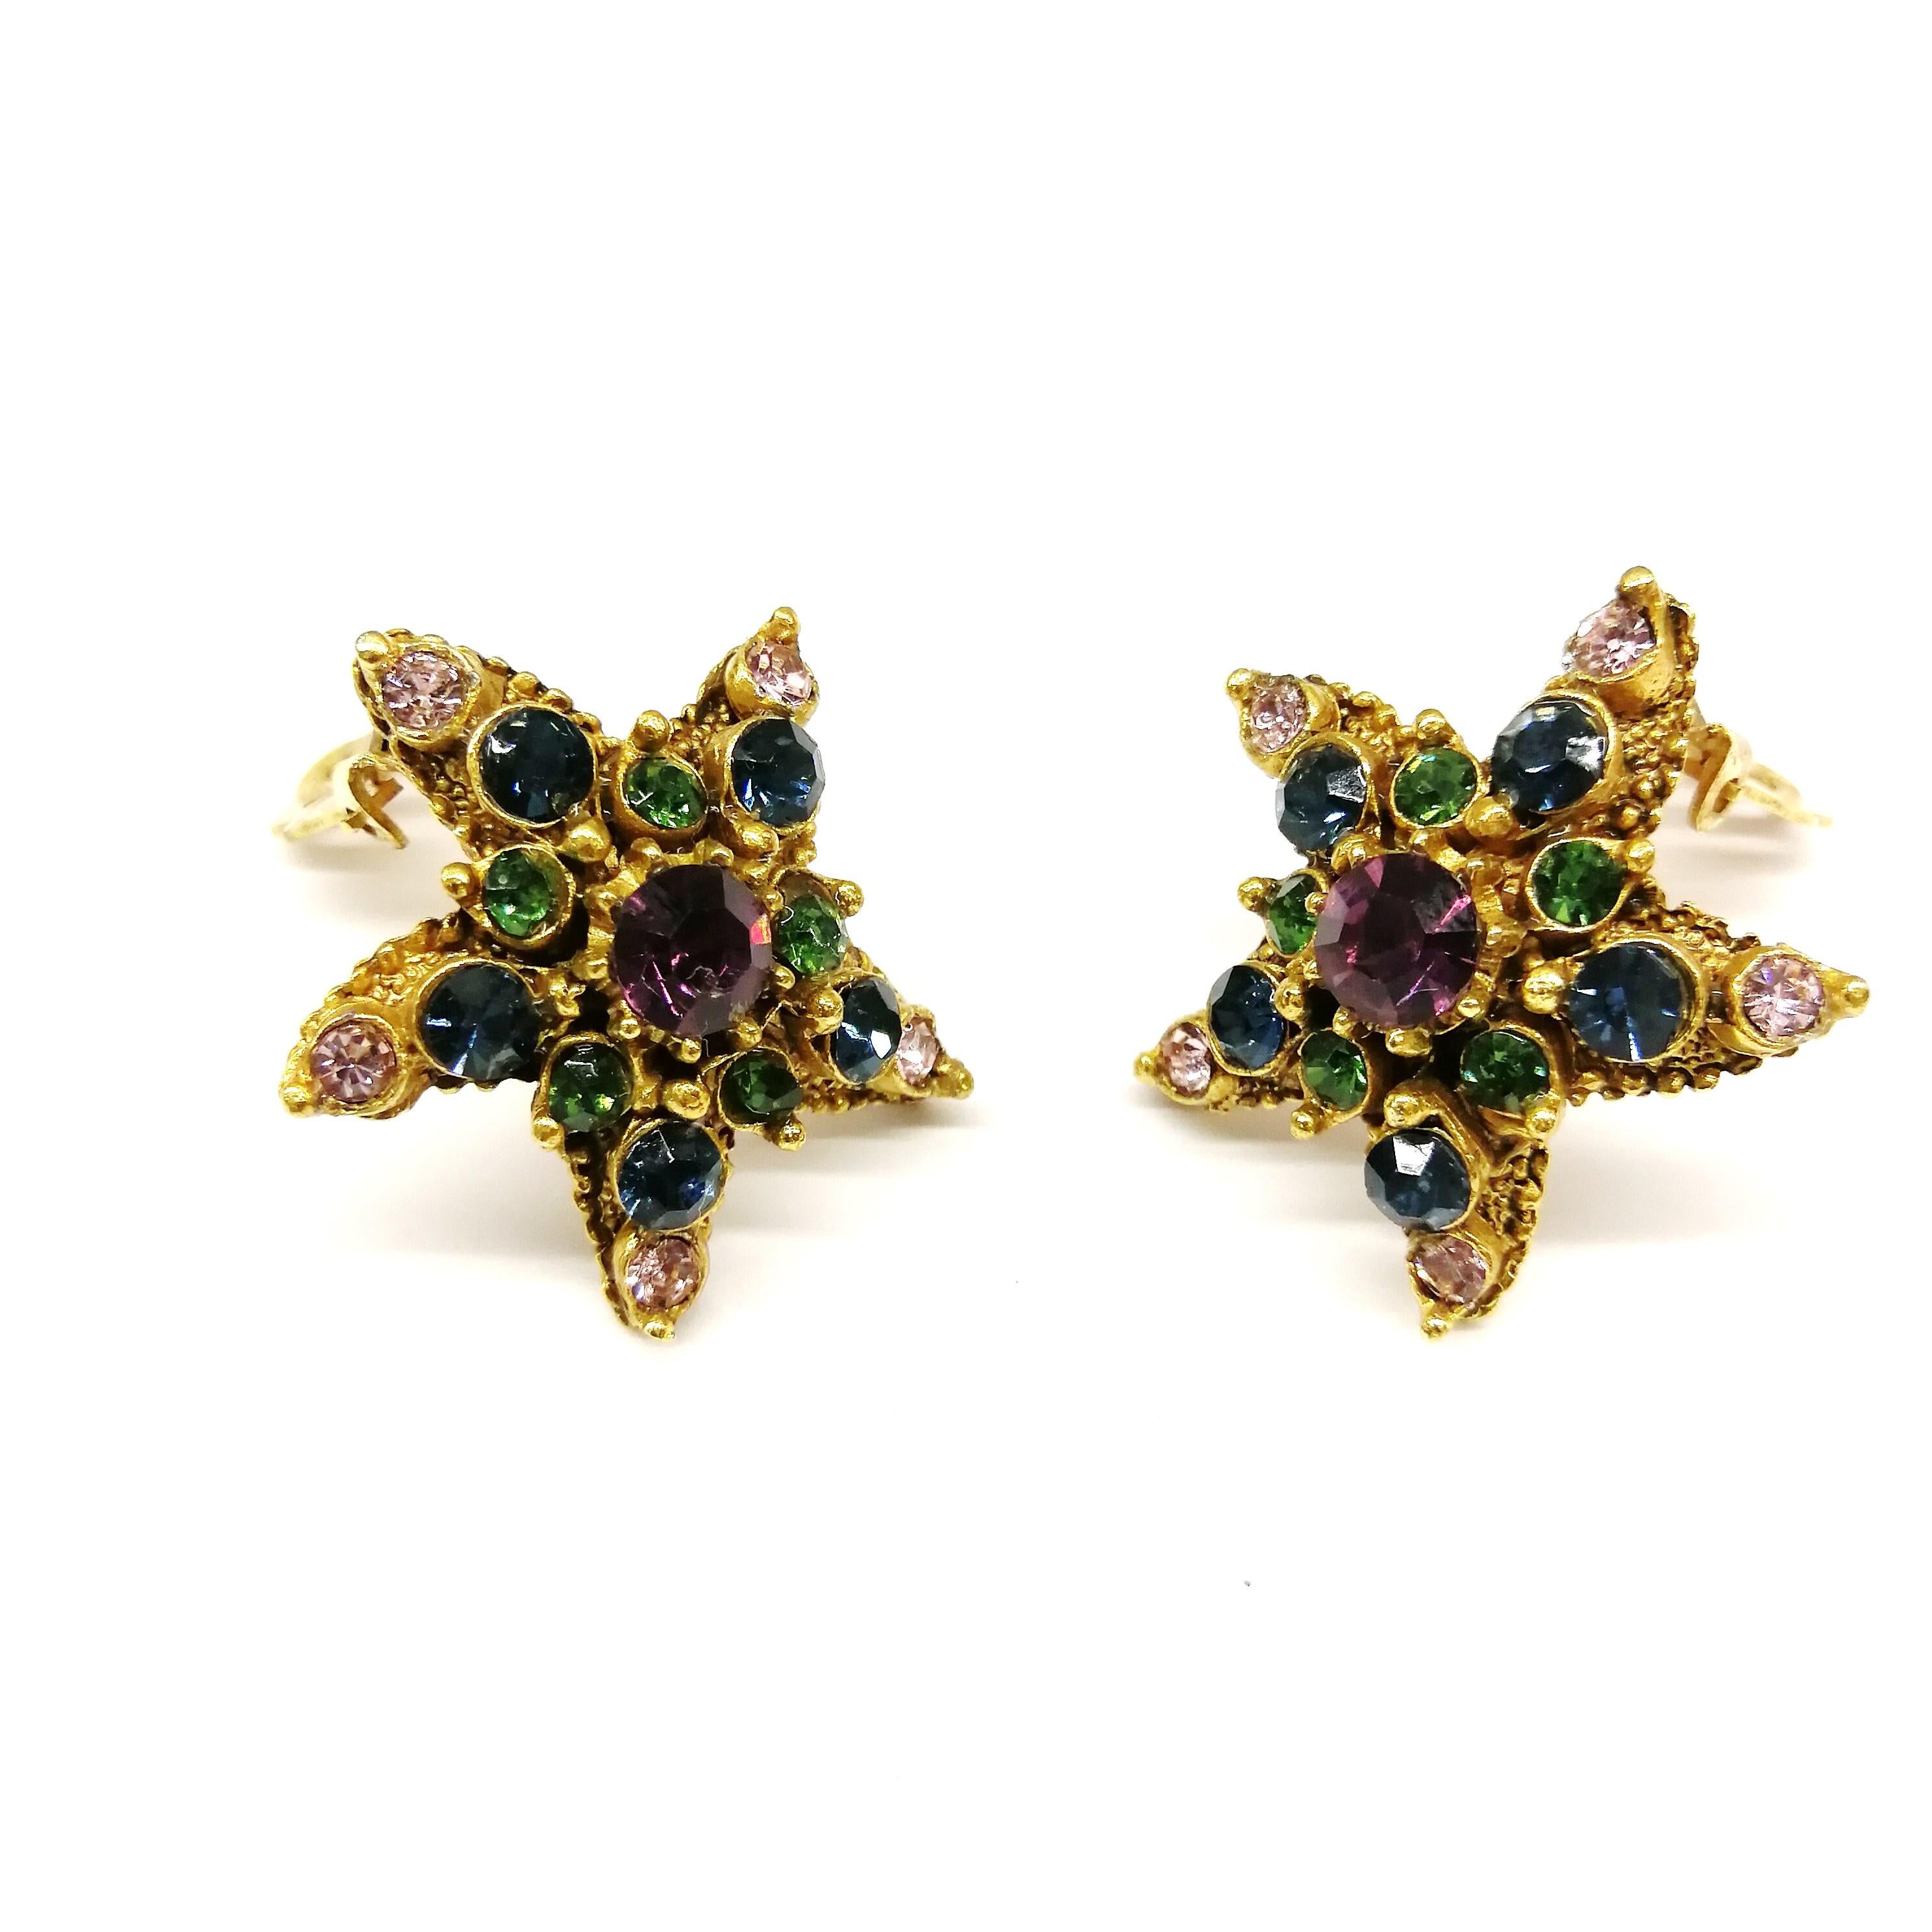 Lovely jewelled earrings in soft colours and soft toned gilt metal, in the form of a stylised 'starfish', from Florenza, from the 1960s.
As you might not expect, Florenza costume jewellery was not named as an homage to Florence, Italy. Instead, it